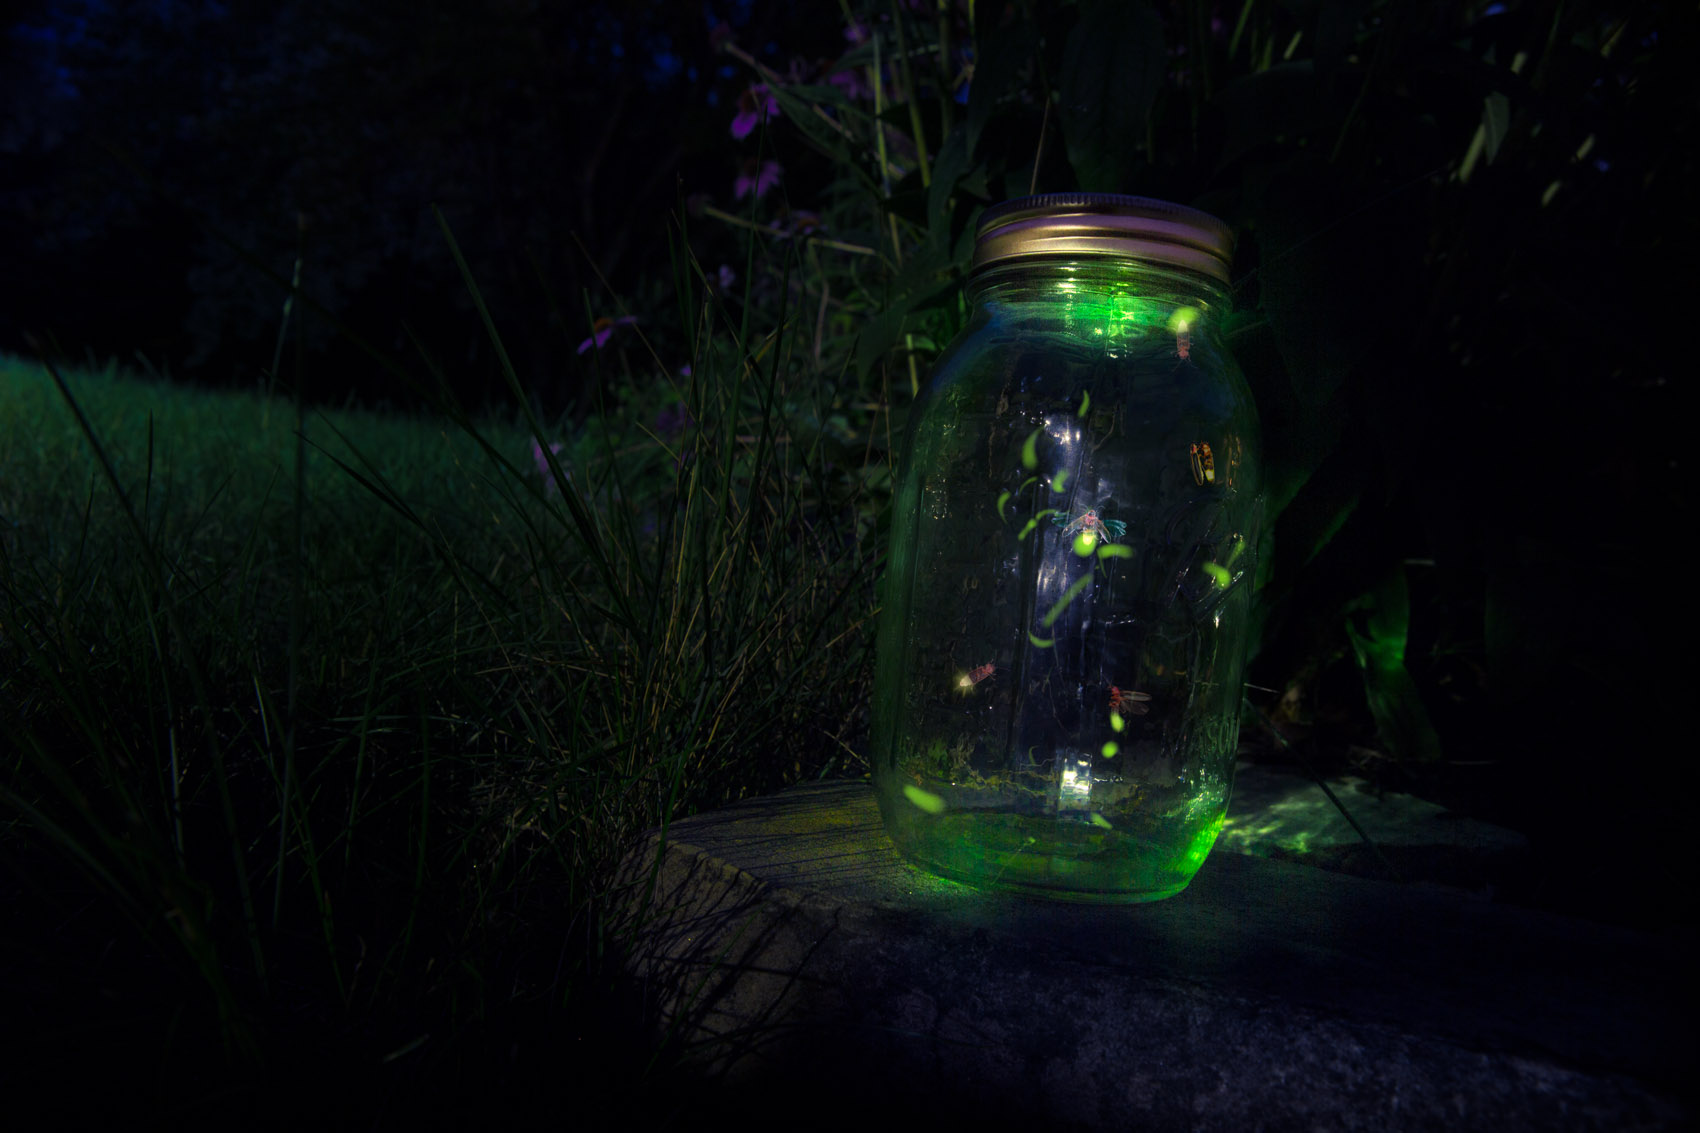 A clear glass mason jar glows green from fireflies within.